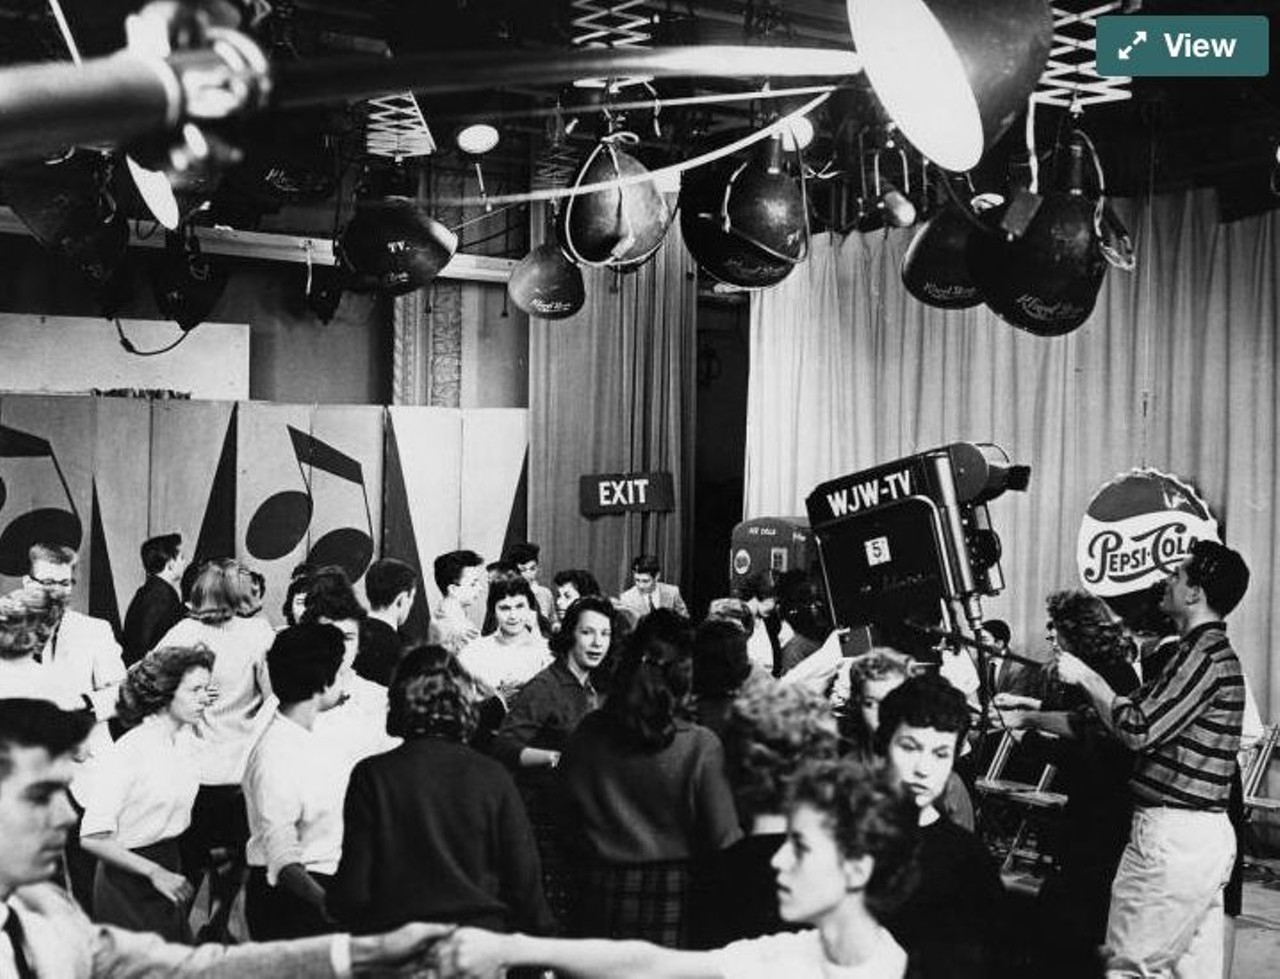 On the set of WJW's teen dance show "Bandstand," 1959